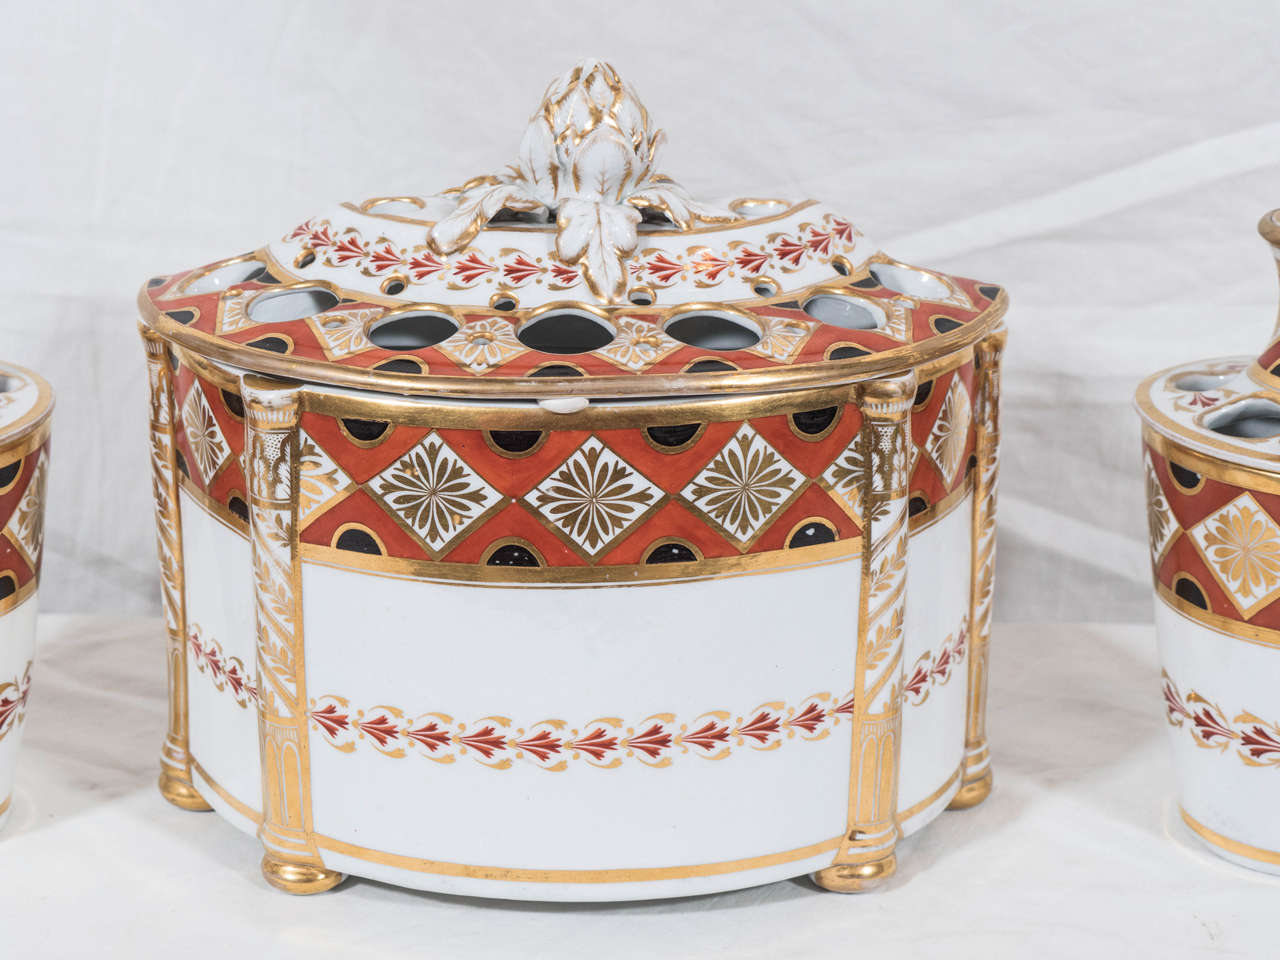 An exceptional three piece Chamberlain Worcester mantel garniture consisting of a bough pot and a pair of root pots painted with a neoclassical design. Contrasting gilded diamonds and black semi-circles decorate an iron red ground.
For an image of